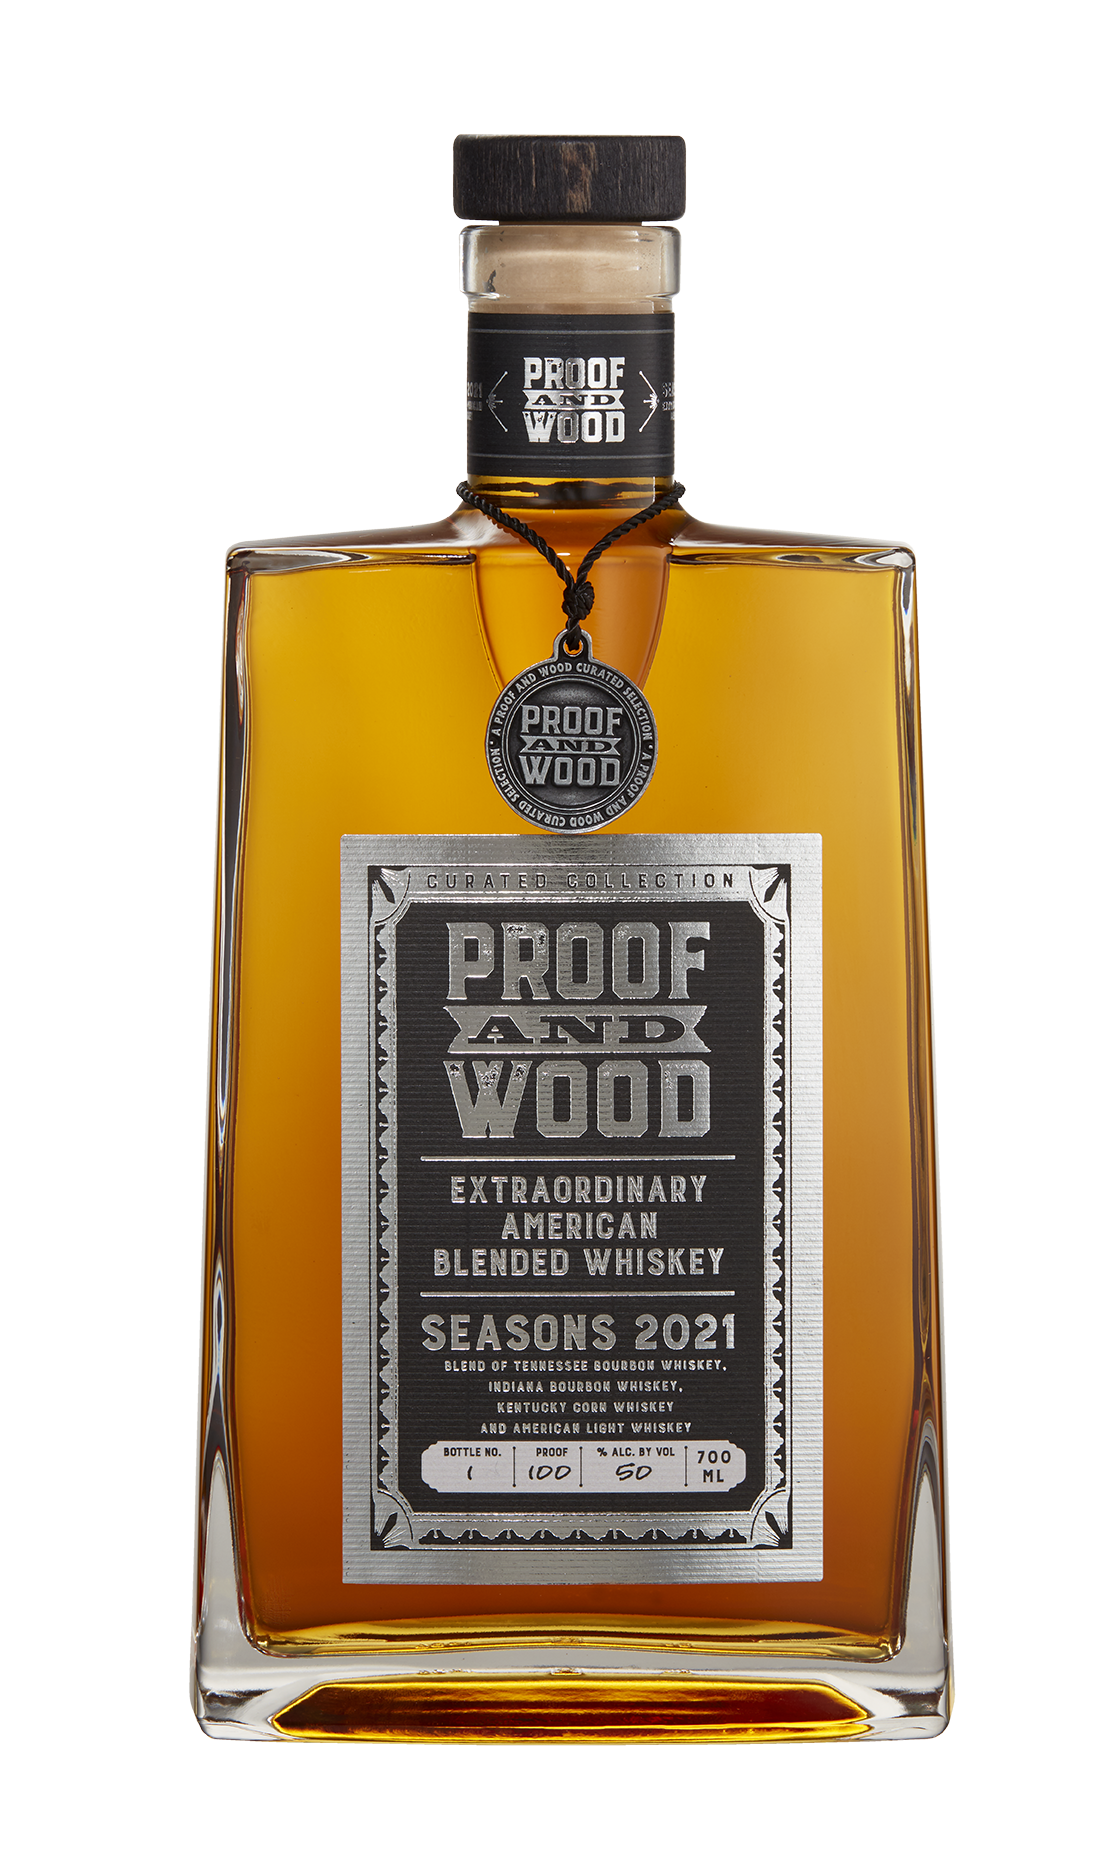 https://www.skurnik.com/wp-content/uploads/1980/06/blended-whiskey-seasons-proof-and-wood-2.png